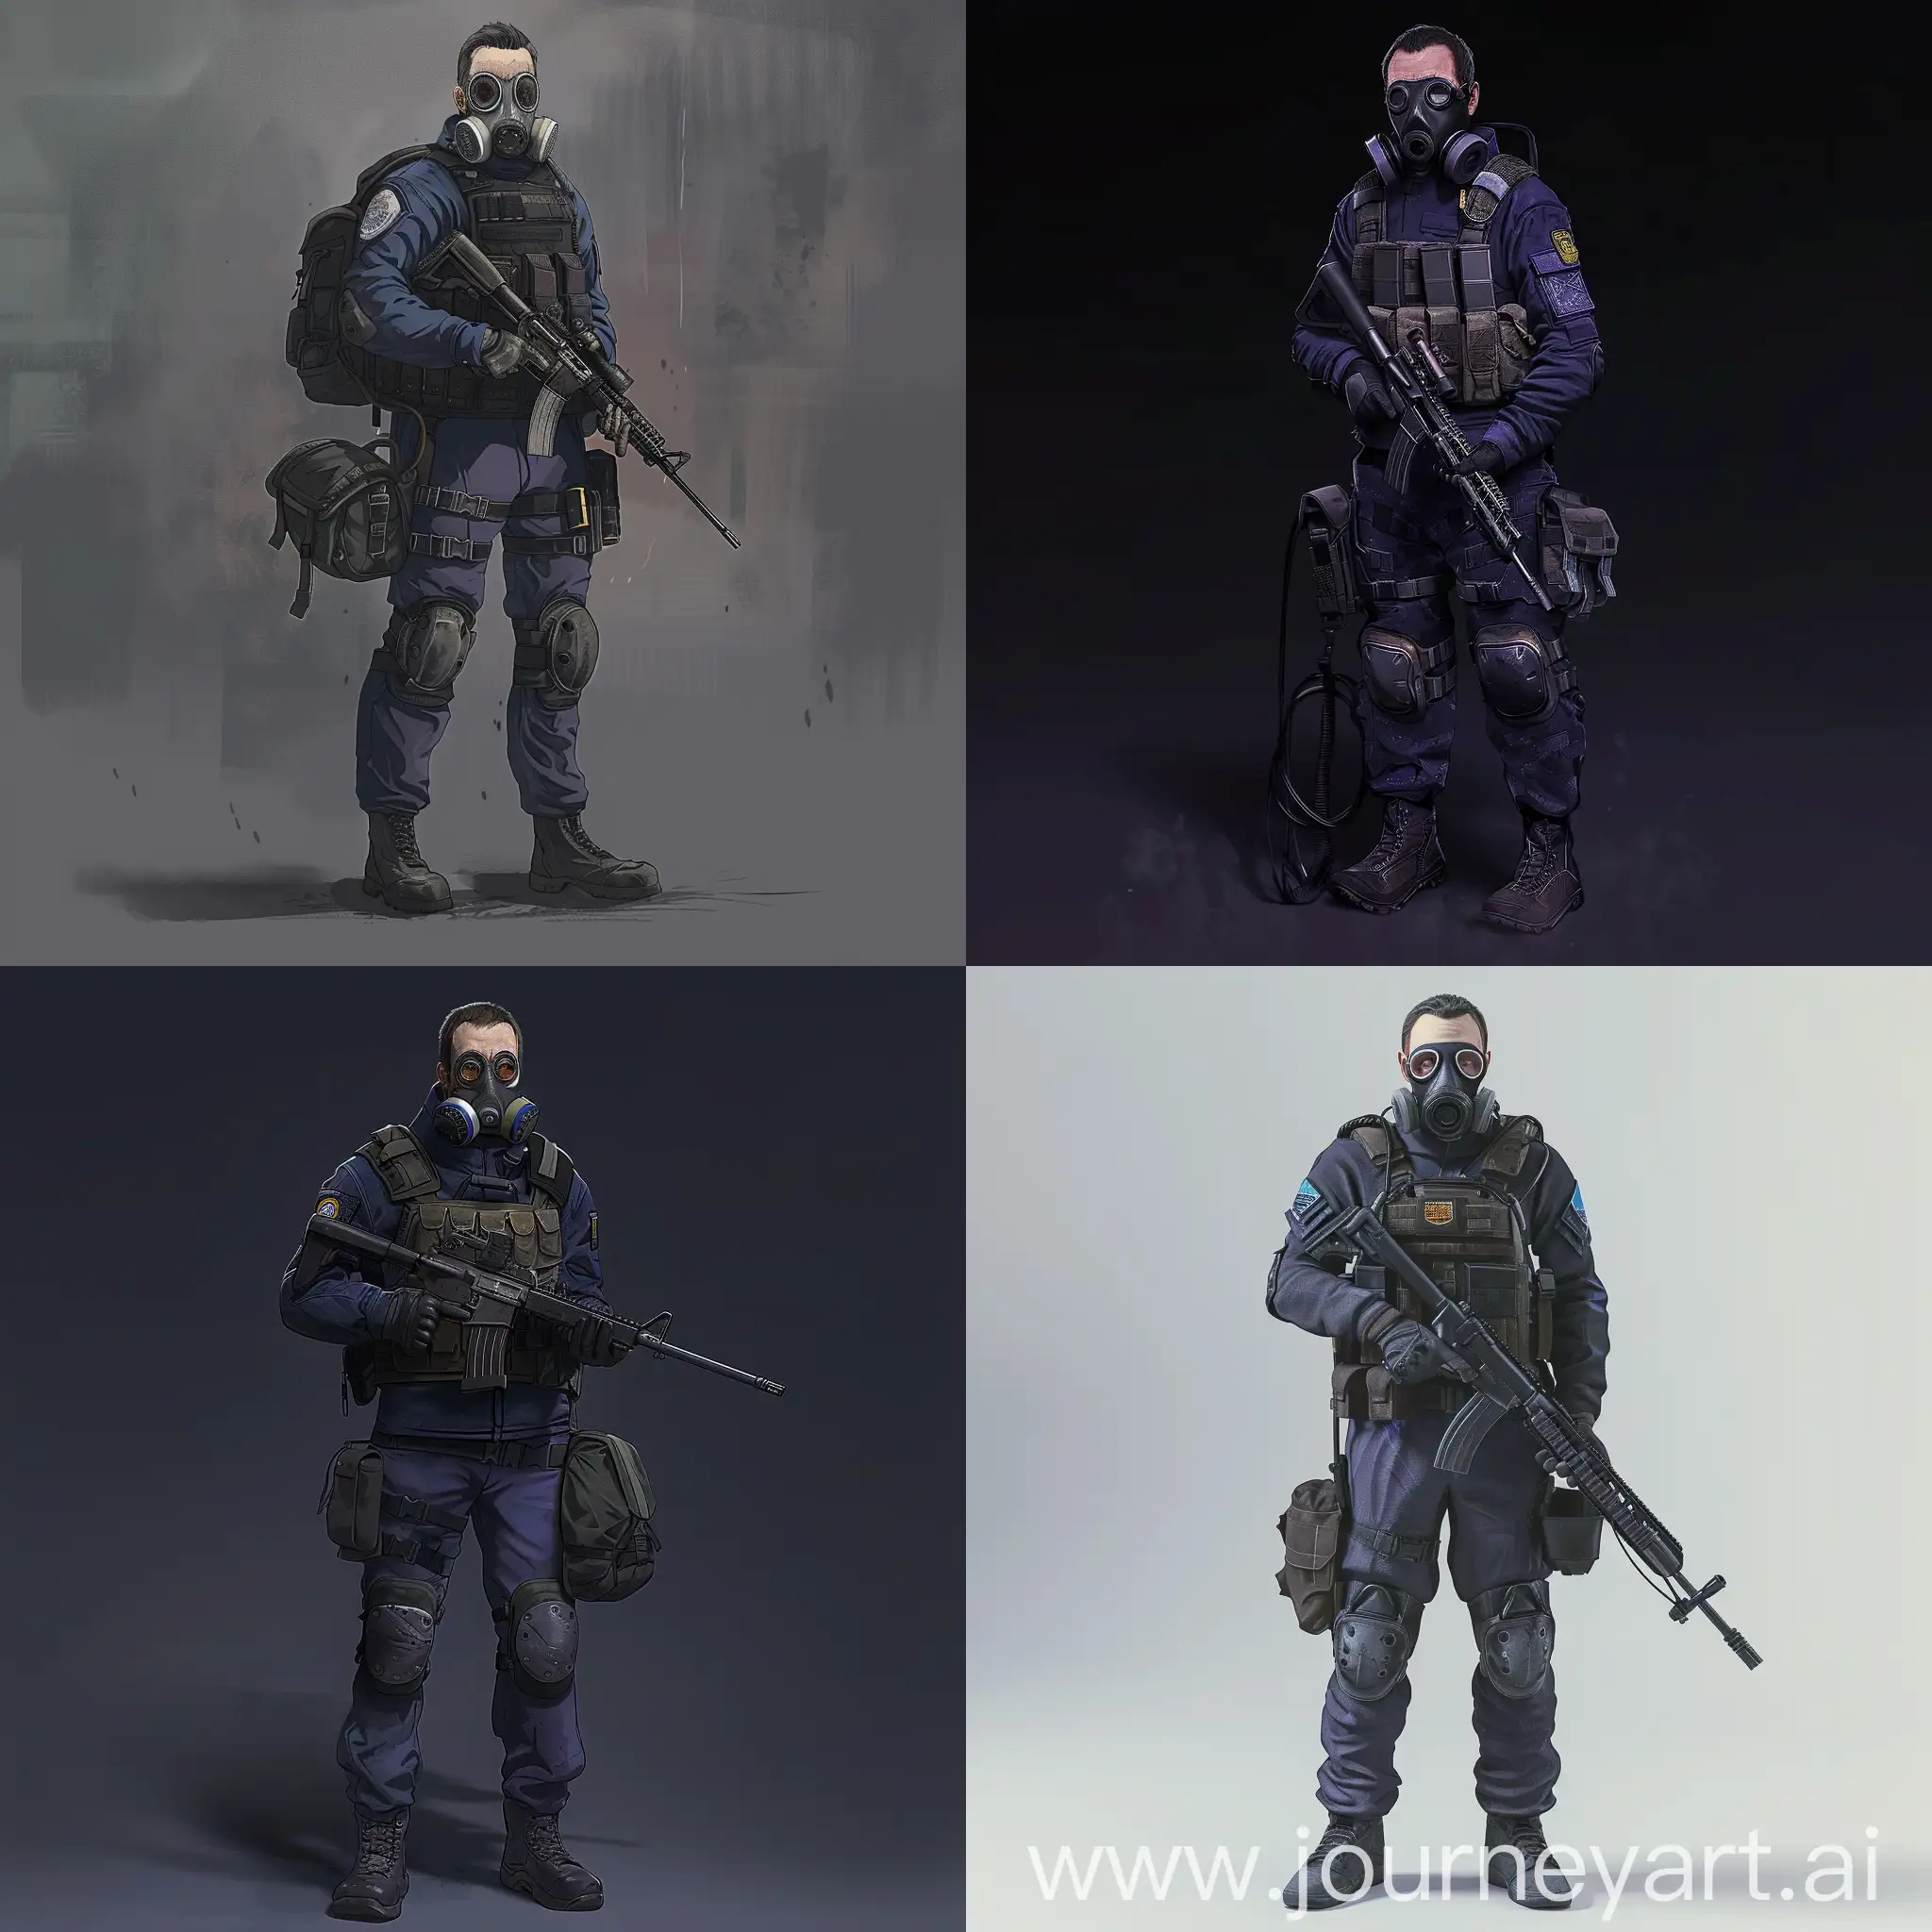 Mercenary, STALKER game, dark purple military jumpsuit, gasmask on his face, small military backpack, military unloading on his body, sniper rifle in his hands.